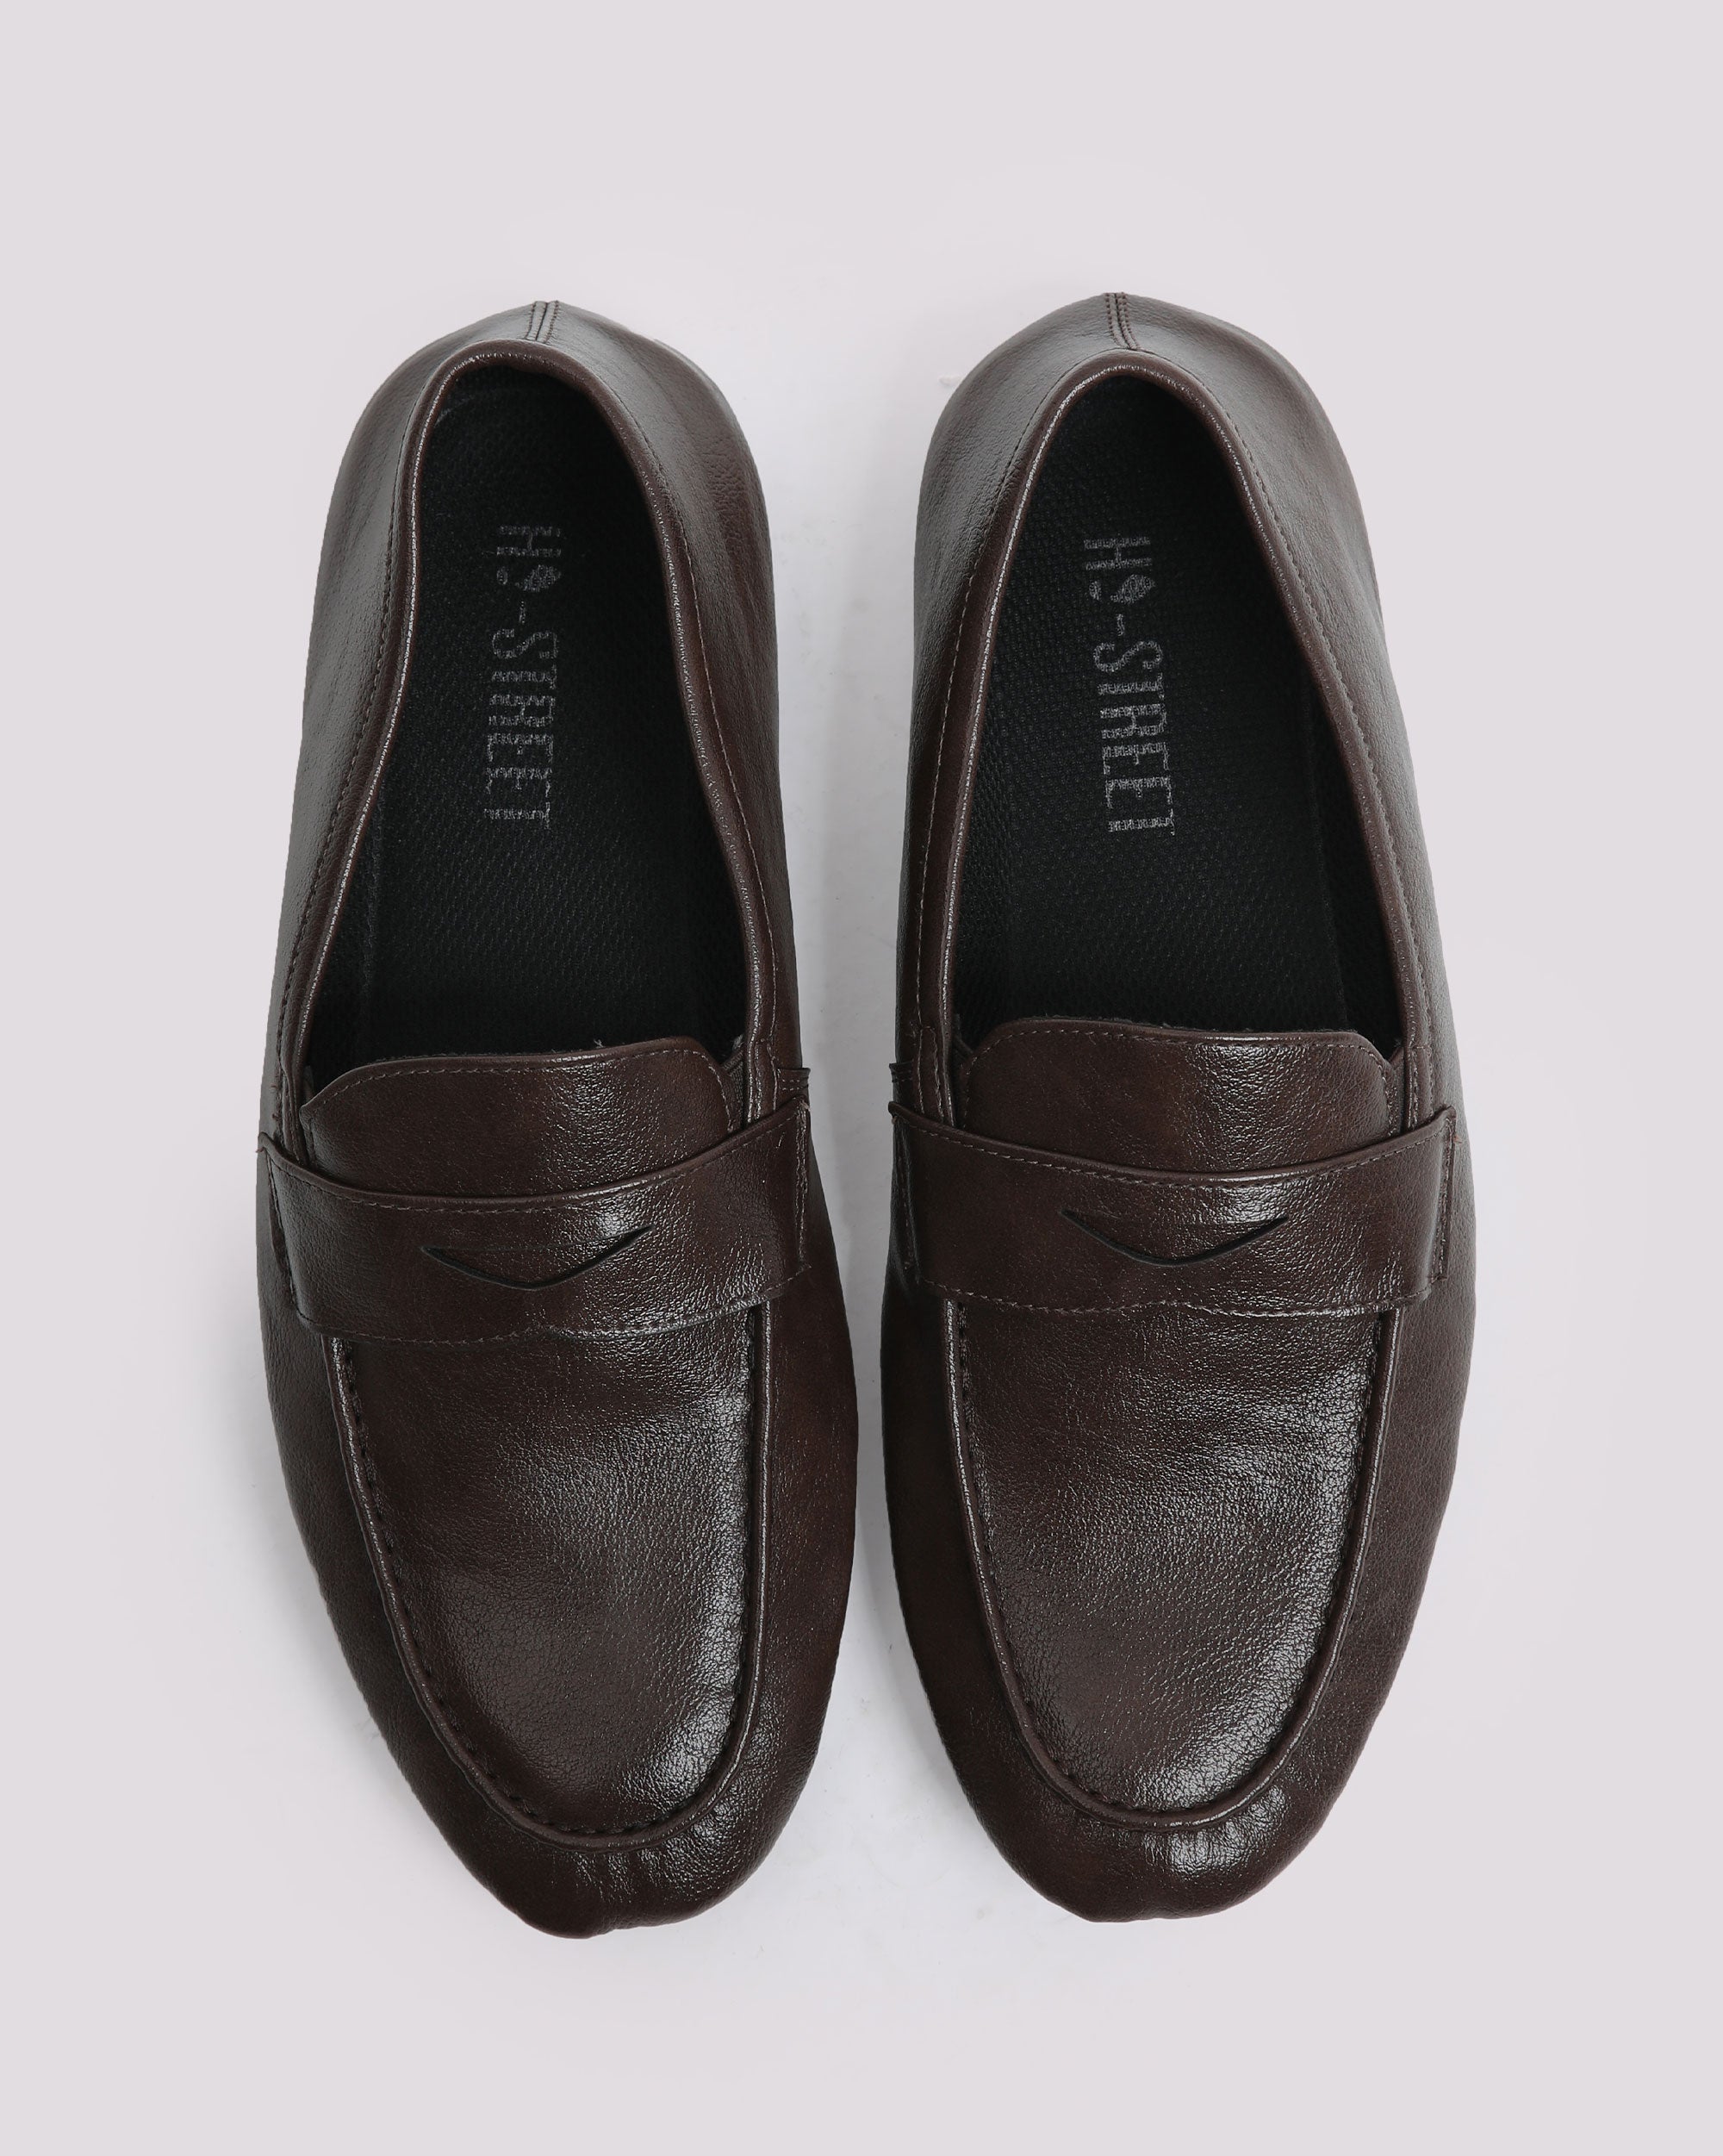 BROWN SOFT LEATHER LOAFER